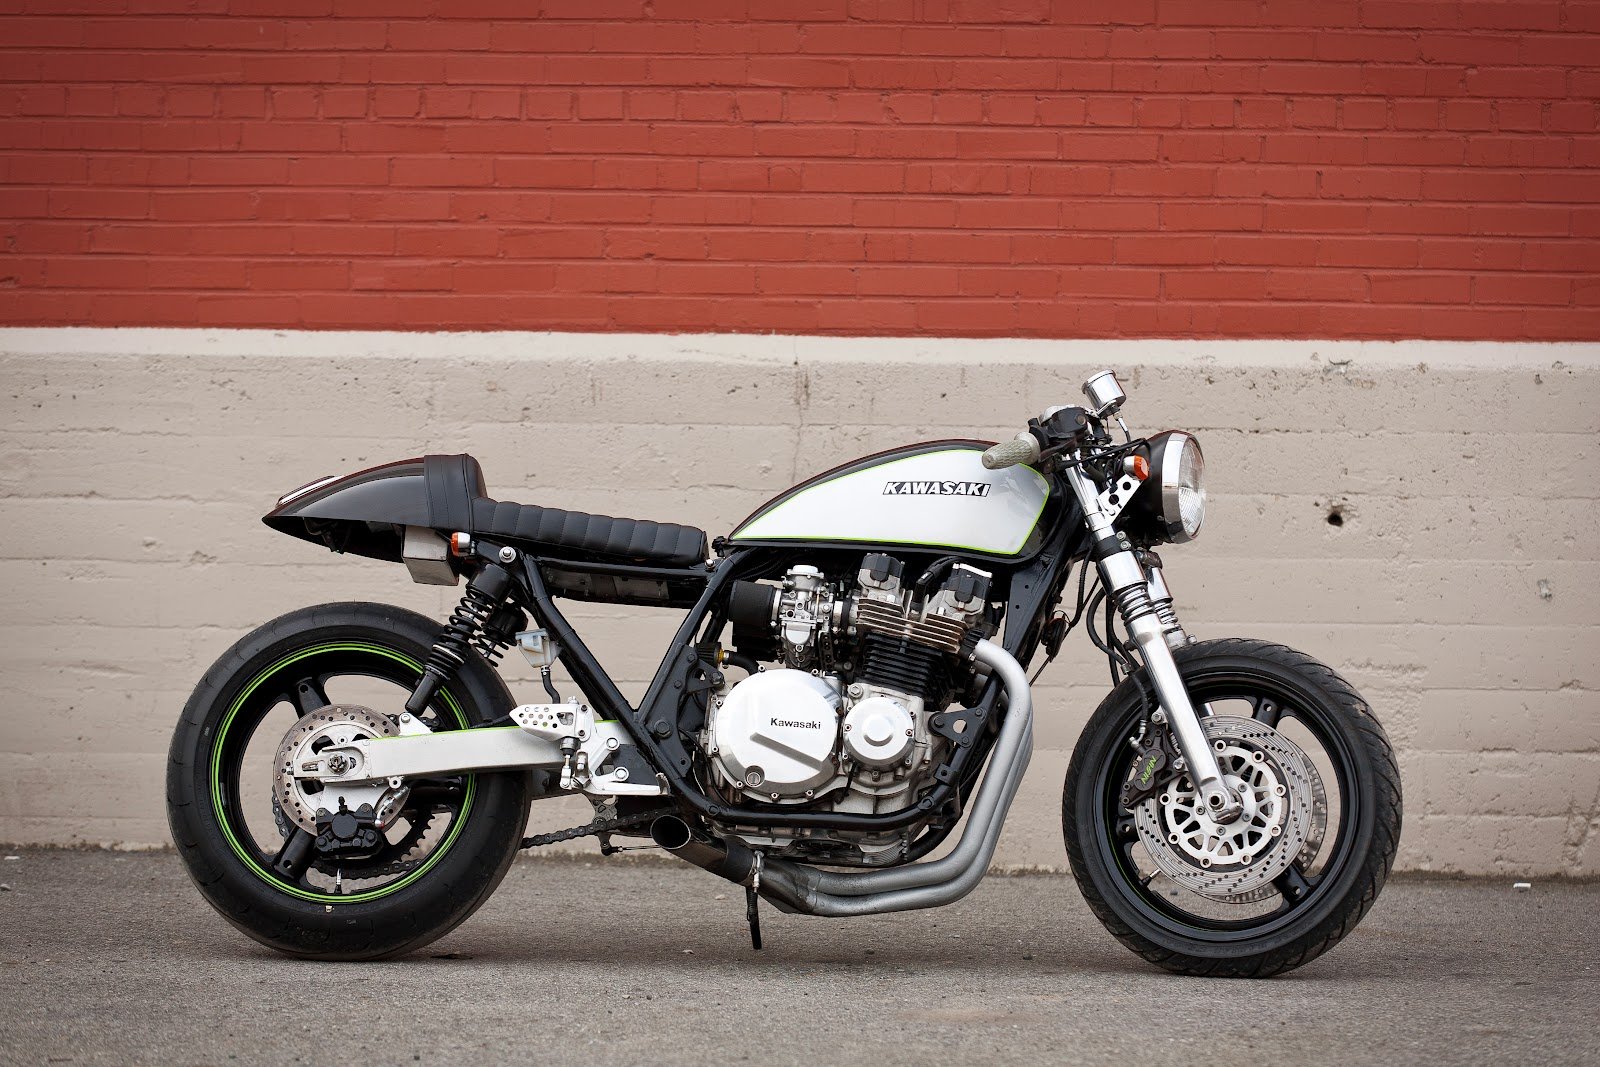 Sweet local cafe racer airhead BMW : motorcycles